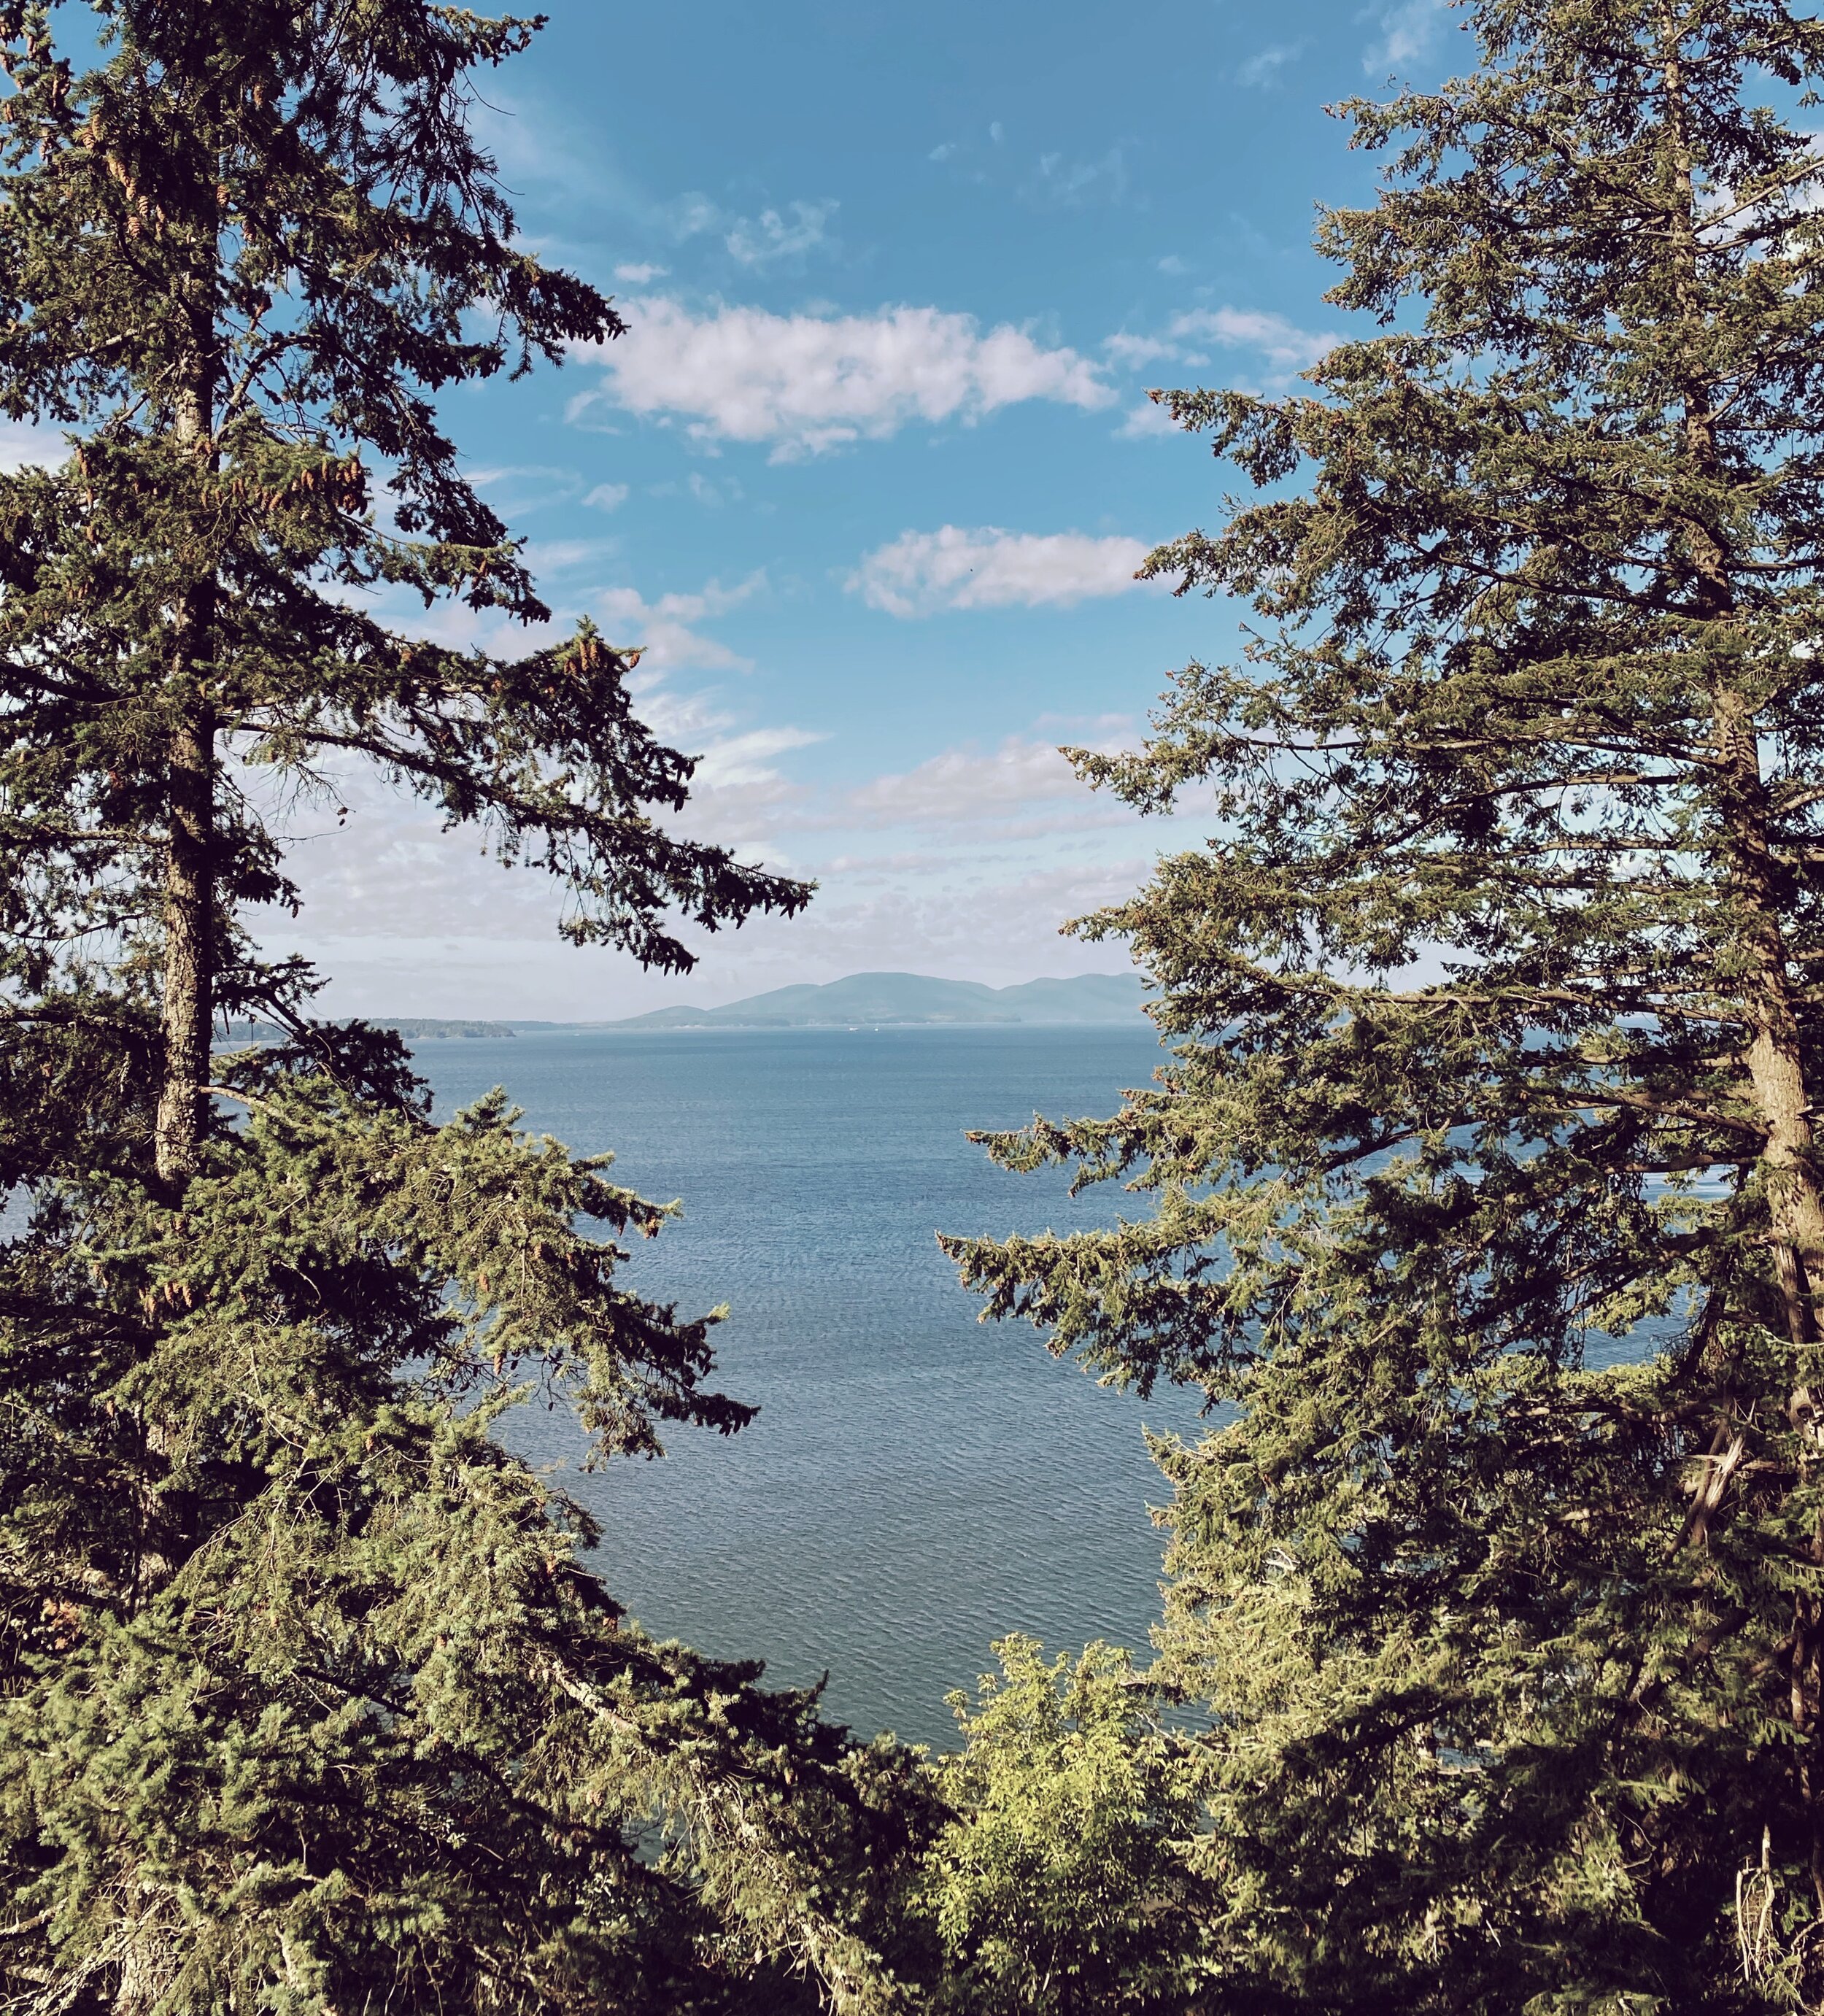 View from the famous Chuckanut Drive in Washington State (Copy)